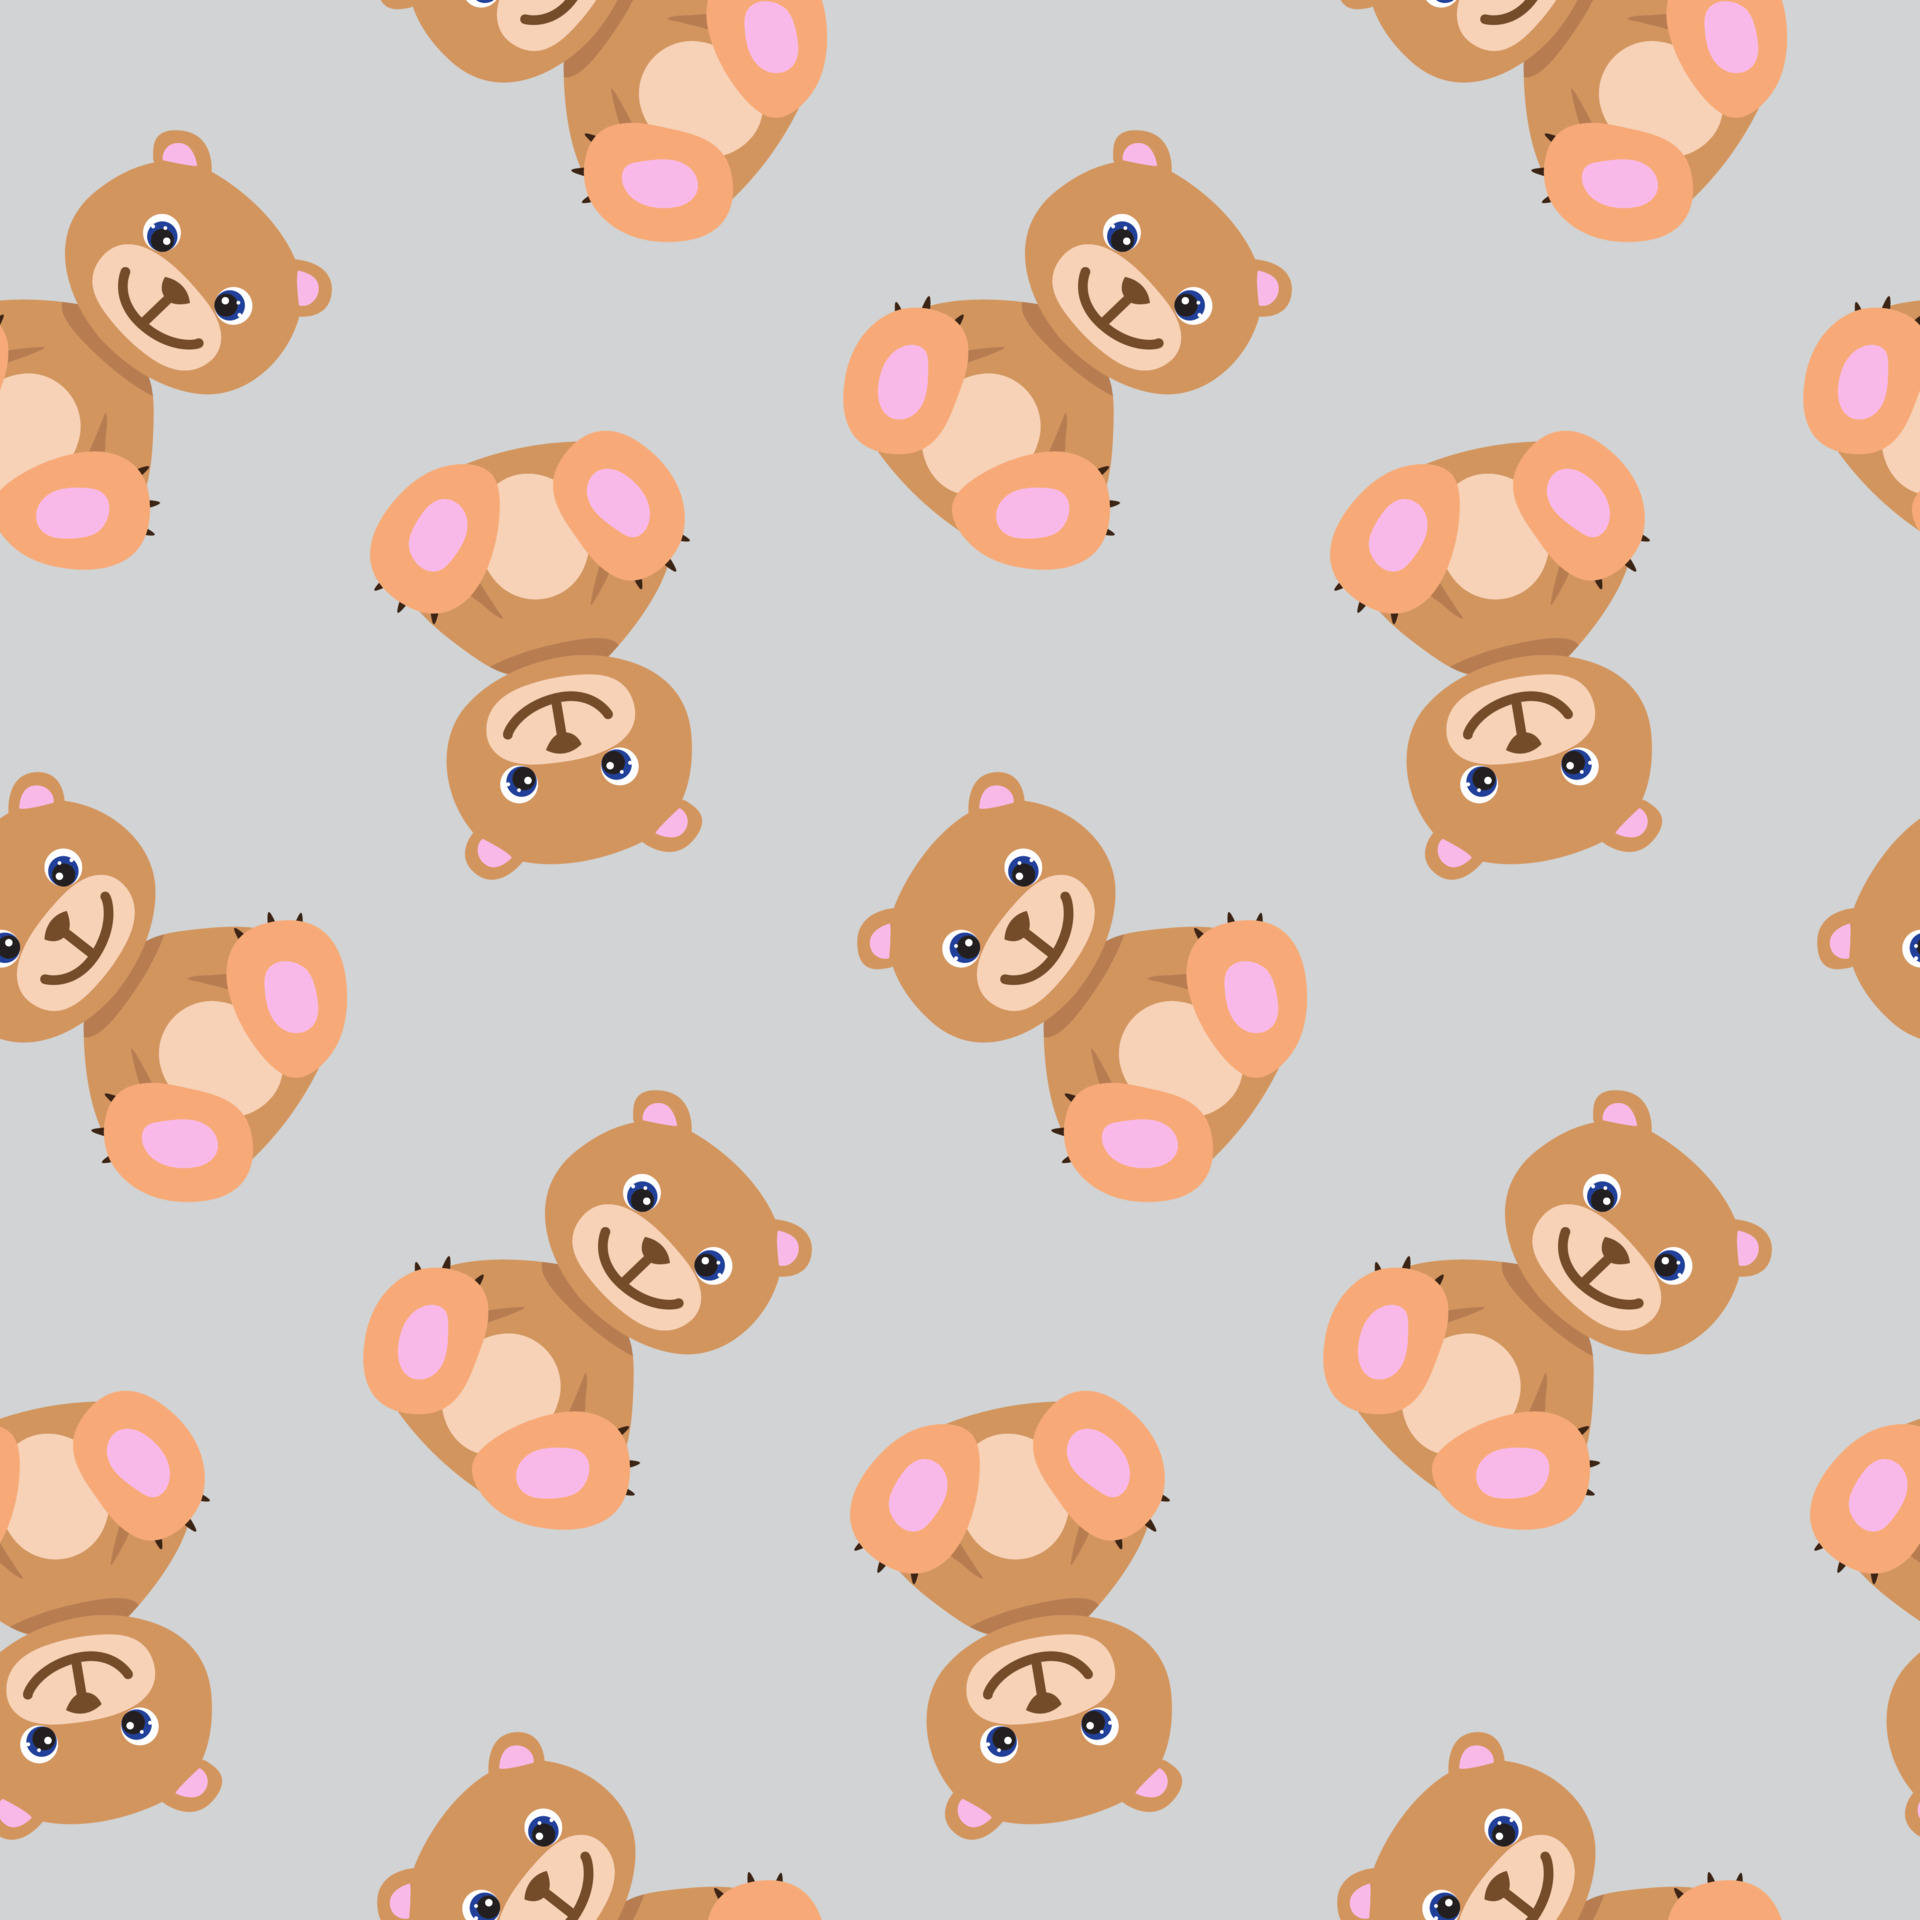 a pattern of teddy bears on a gray background Wallpaper